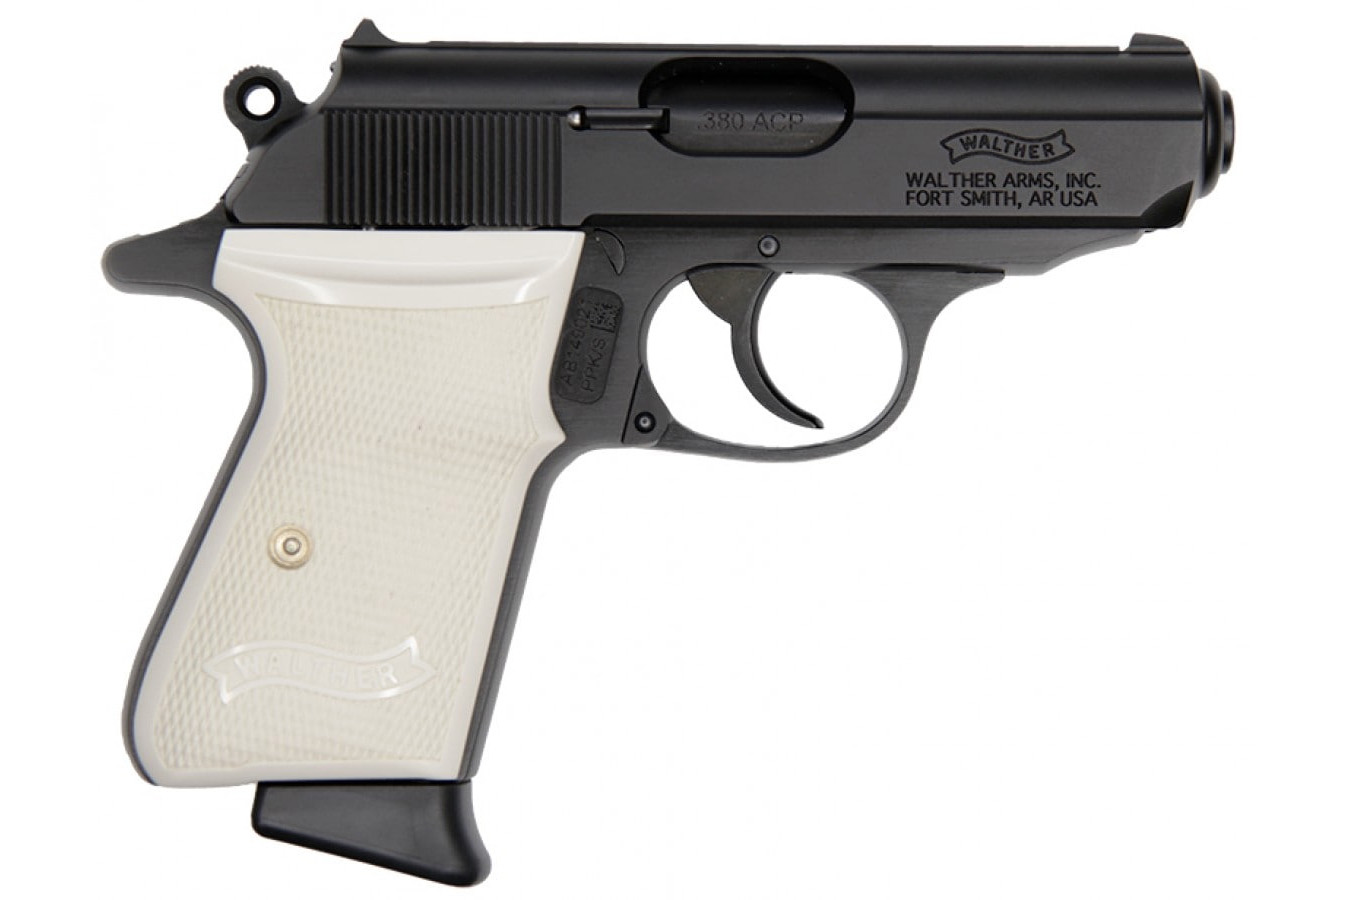 PPK 380 ACP PISTOL WITH BLACK FINISH AND WHITE PEARL GRIPS